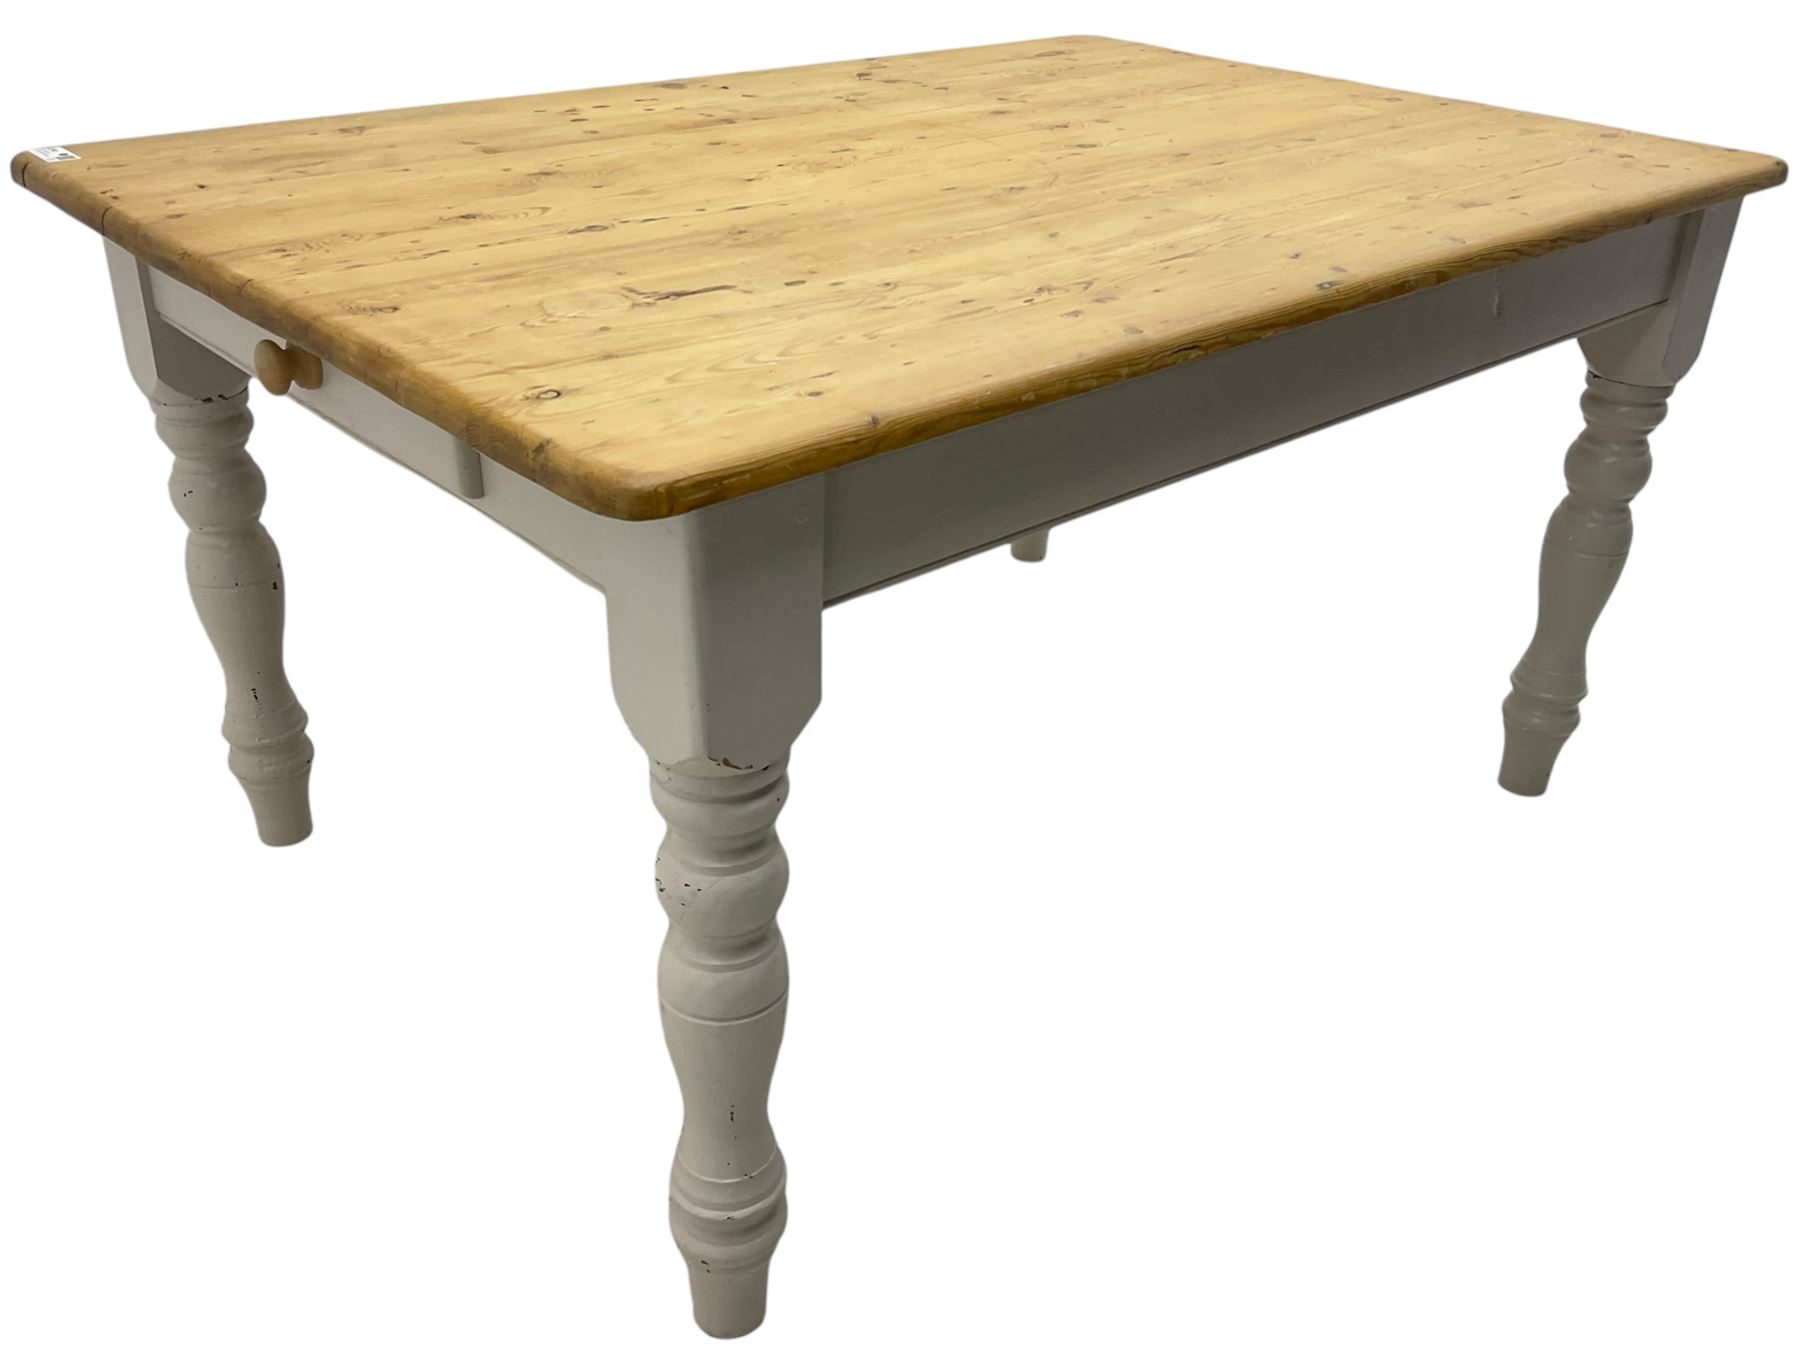 Pine farmhouse kitchen dining table - Image 4 of 7